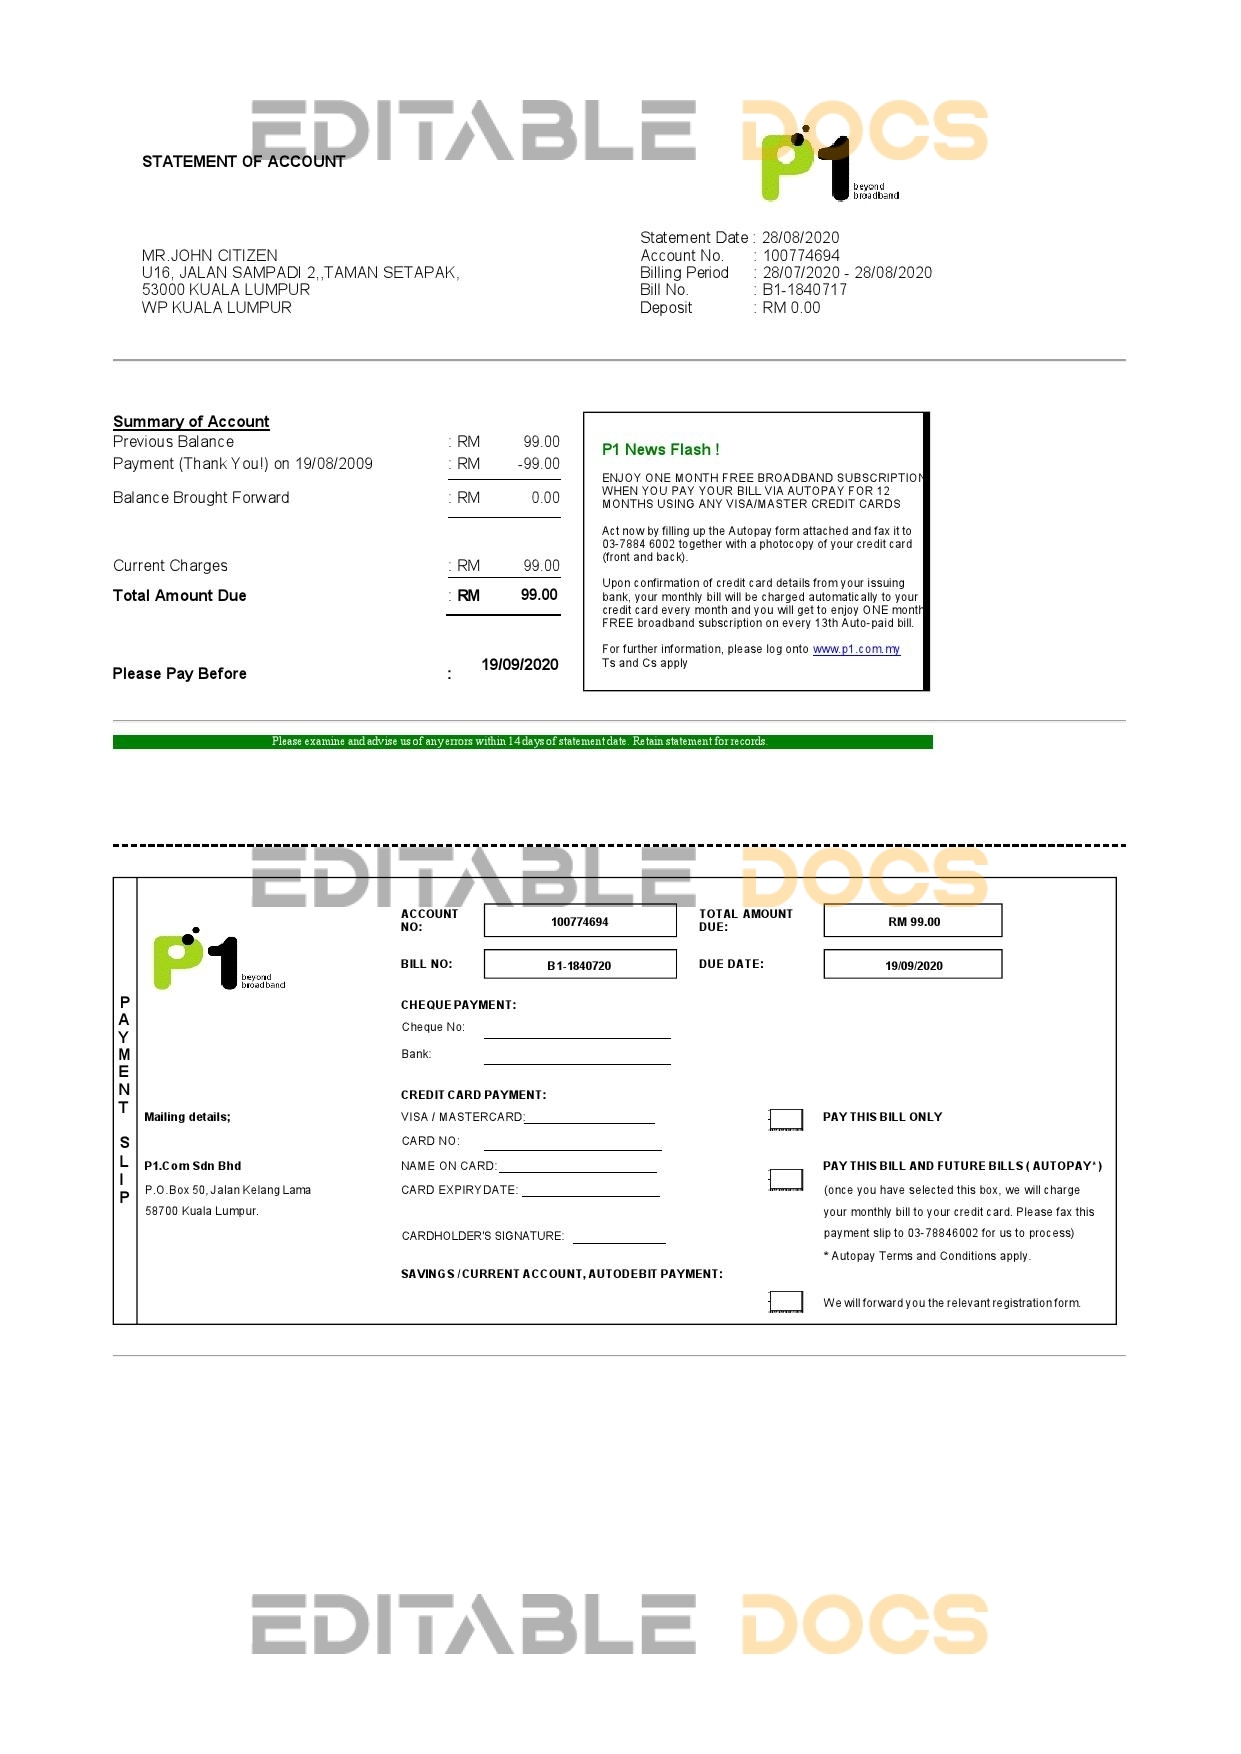 Malaysia Packet 1 Network bank statement template in Word and PDF format (3 pages)